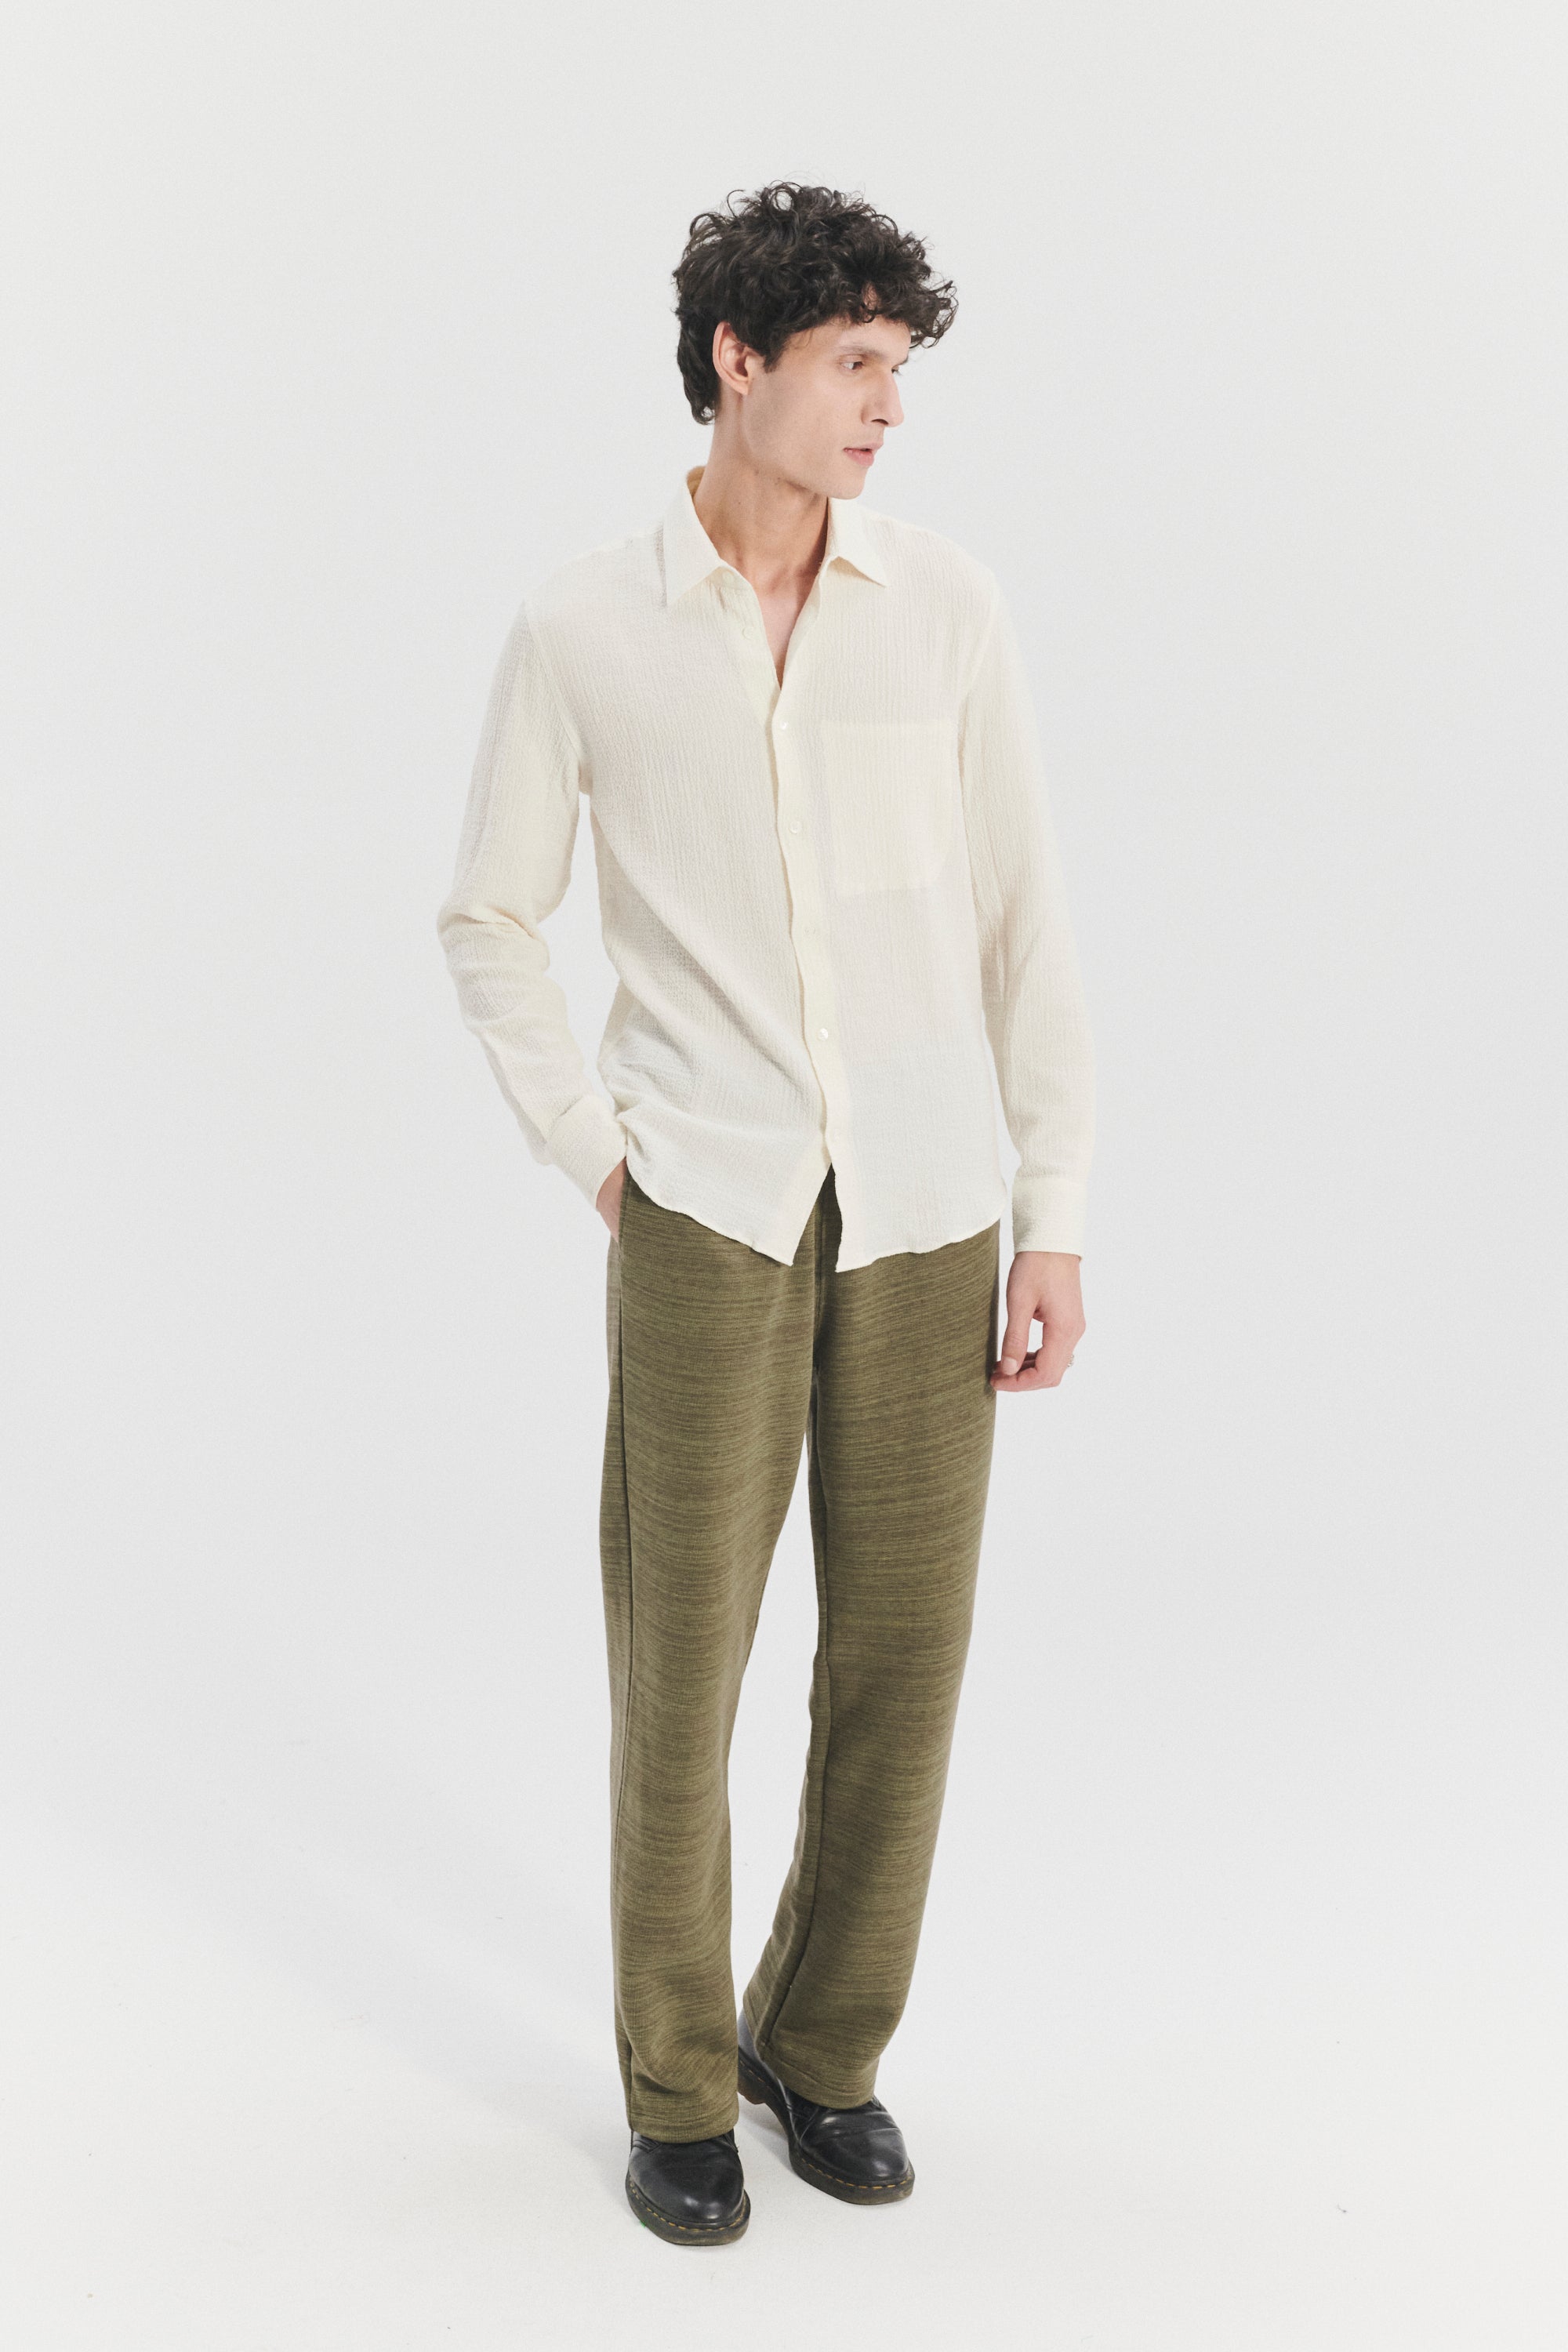 feel-good-shirt-in-the-finest-portuguese-cashmere-and-cotton-creamy-seersucker